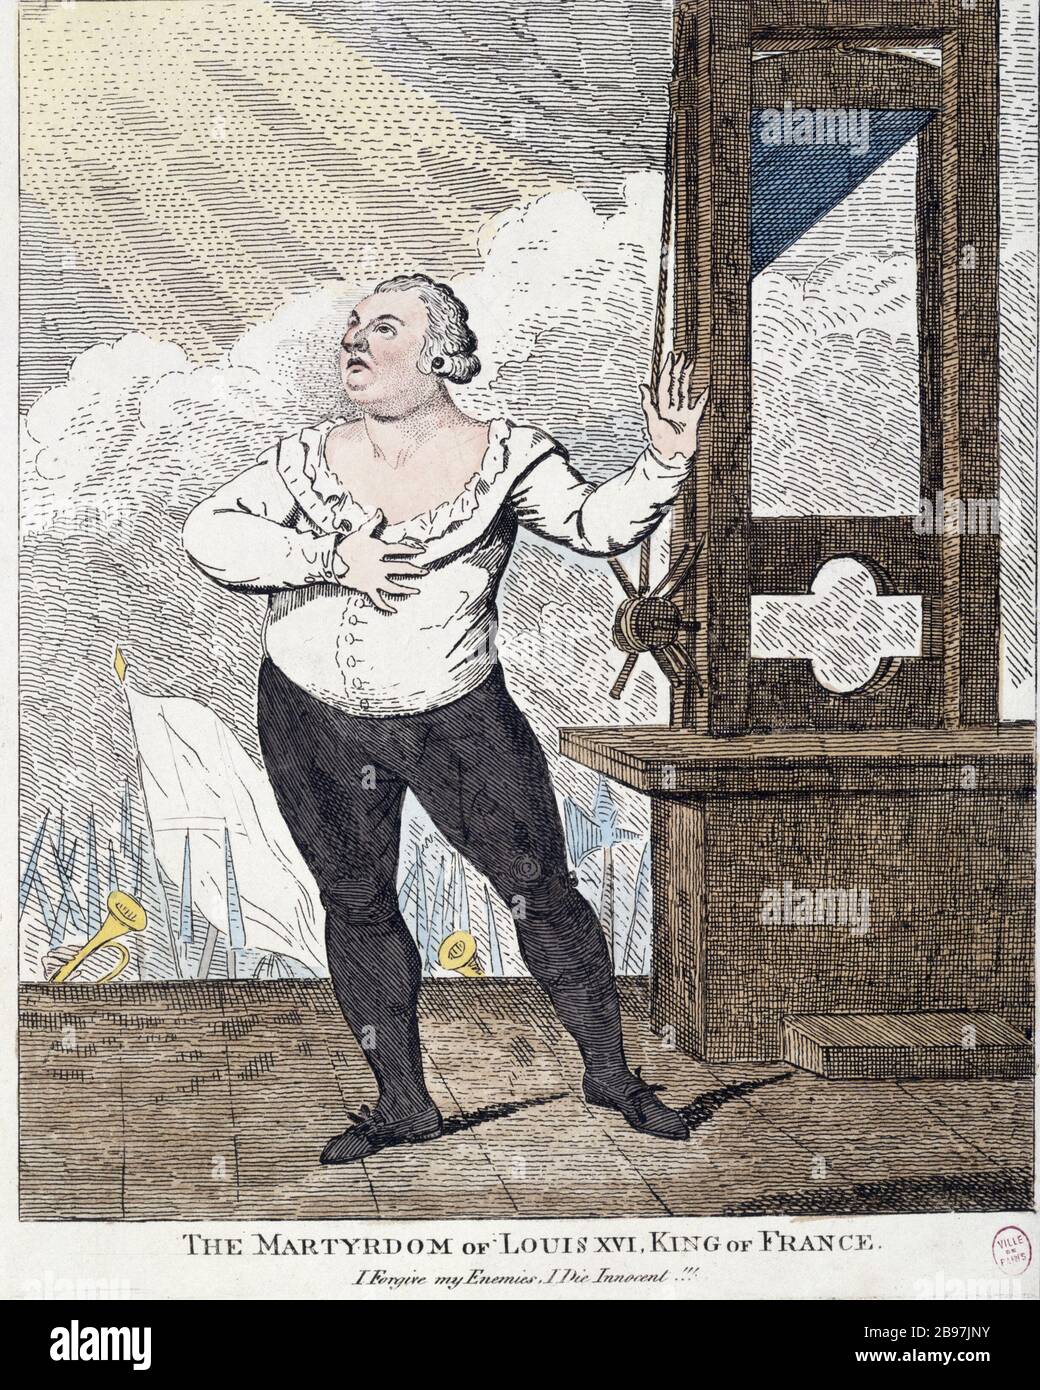 THE MARTYRDOM OF LOUIS XVI, KING OF FRANCE - I FORGIVE MY ENEMIES, I DIE INNOCENT !!! Georges Cruikshank. 'The Martyrdom of Louis XVI, King of France - I Forgive my Enemies, I Die Innocent !!!'. Estampe. Paris, musée Carnavalet. Stock Photo